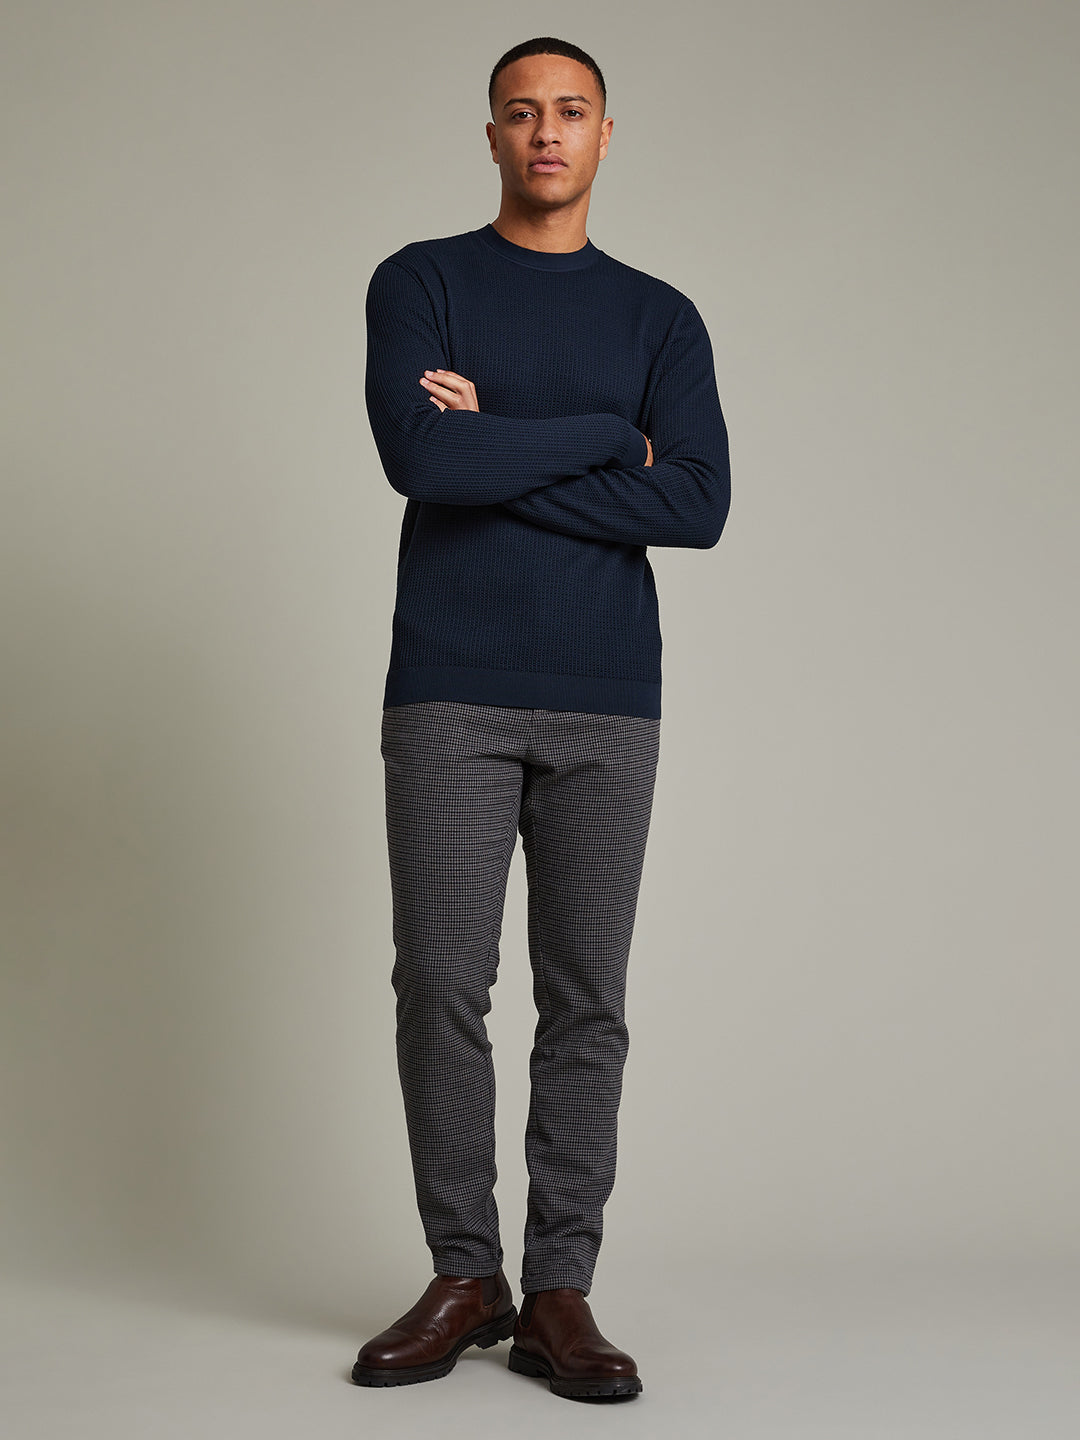 Matinique Men Navy Blue Solid Sweater